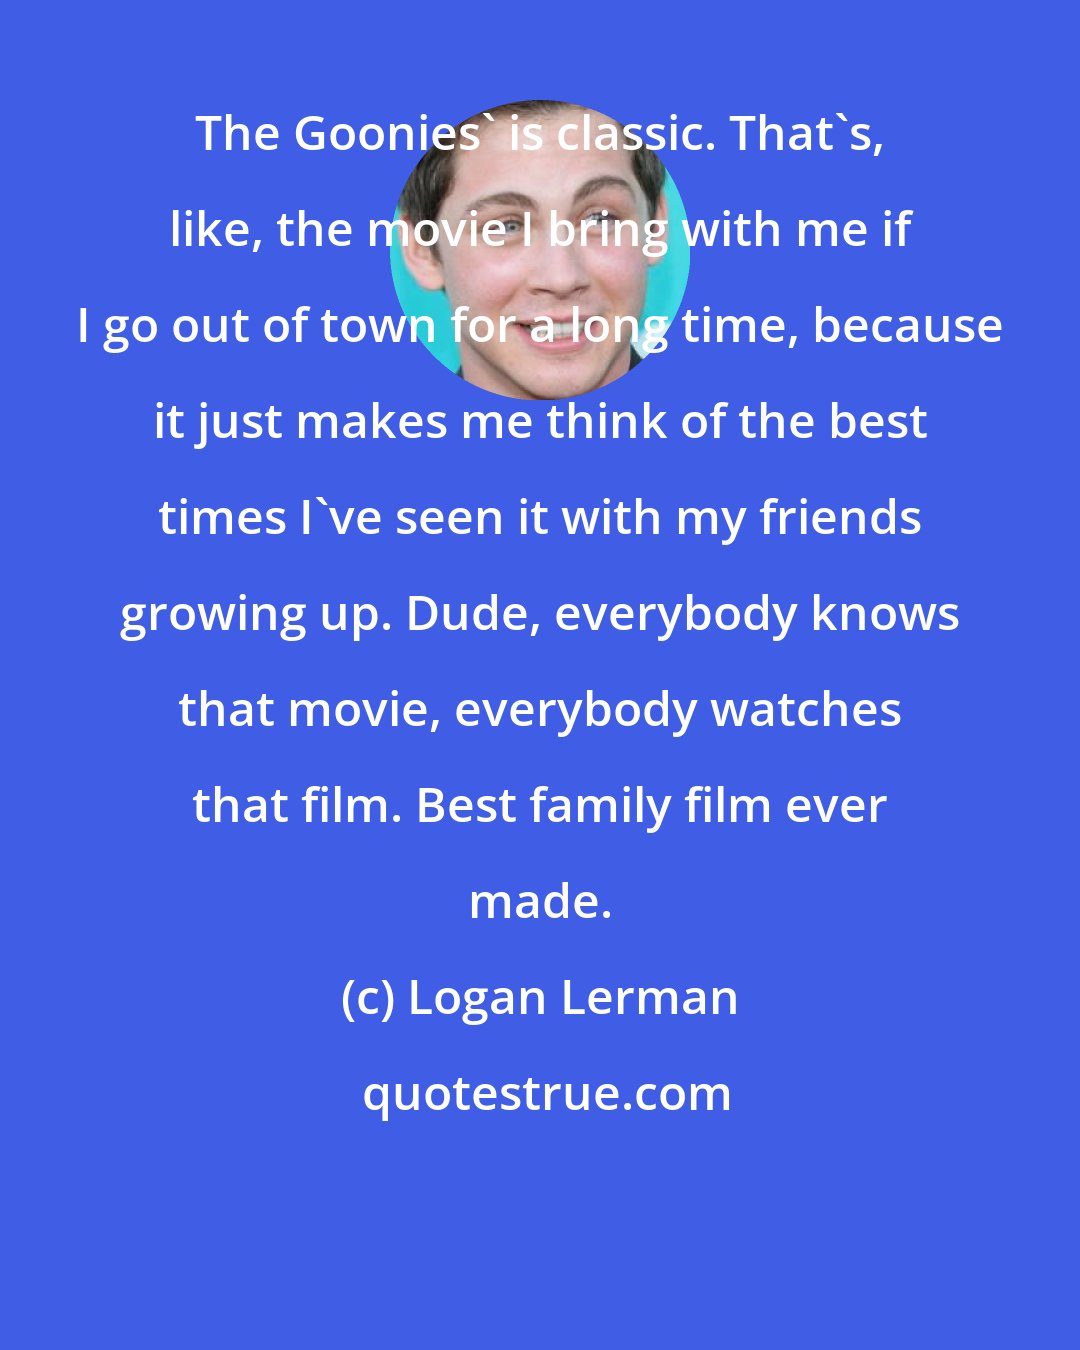 Logan Lerman: The Goonies' is classic. That's, like, the movie I bring with me if I go out of town for a long time, because it just makes me think of the best times I've seen it with my friends growing up. Dude, everybody knows that movie, everybody watches that film. Best family film ever made.